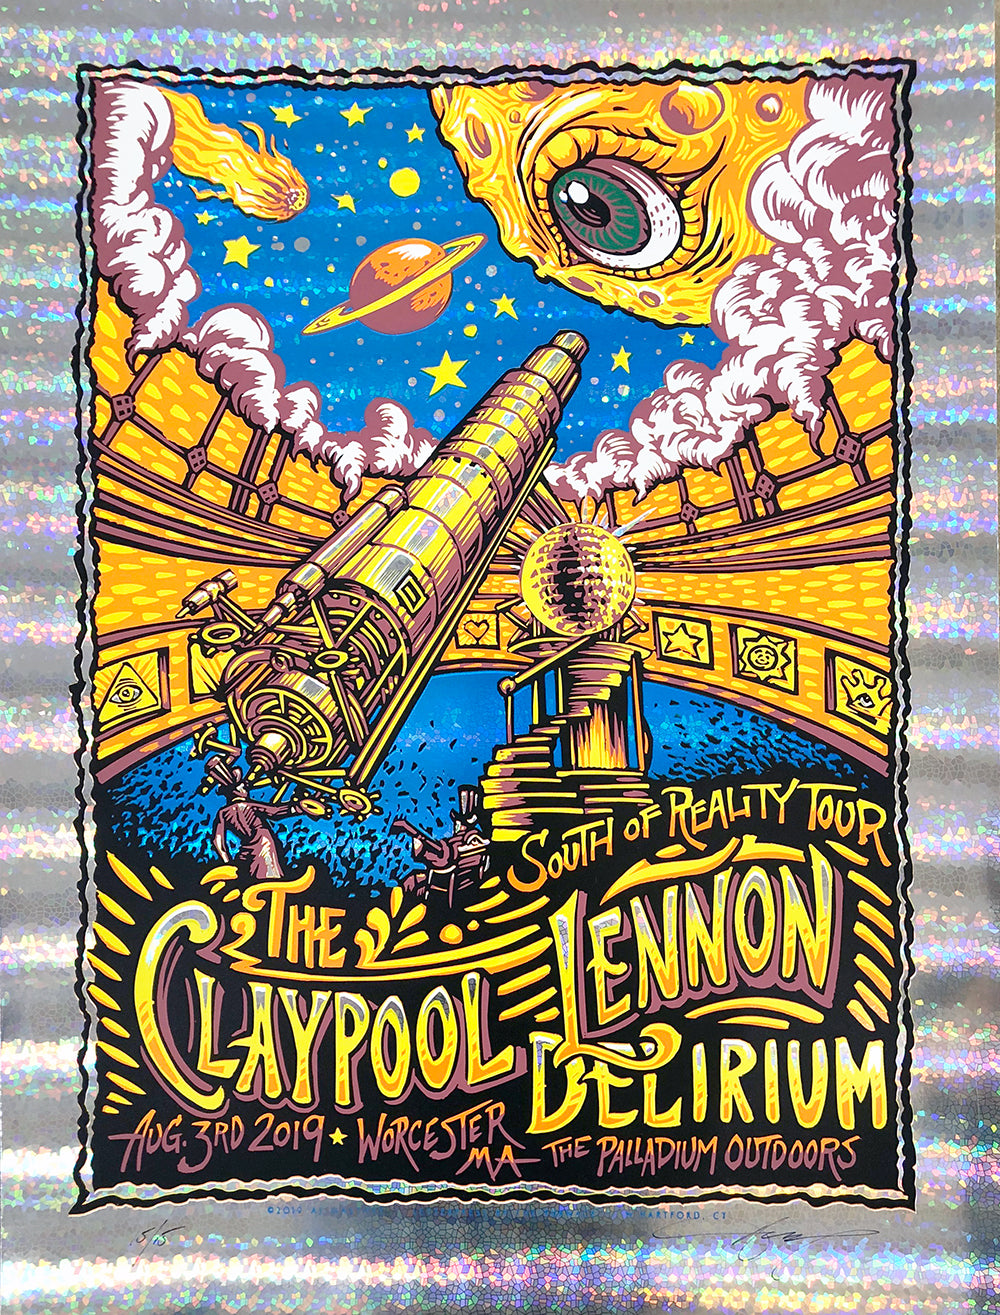 AJ Masthay "Claypool Lennon Delirium - Worcester, MA" Stained Glass Foil